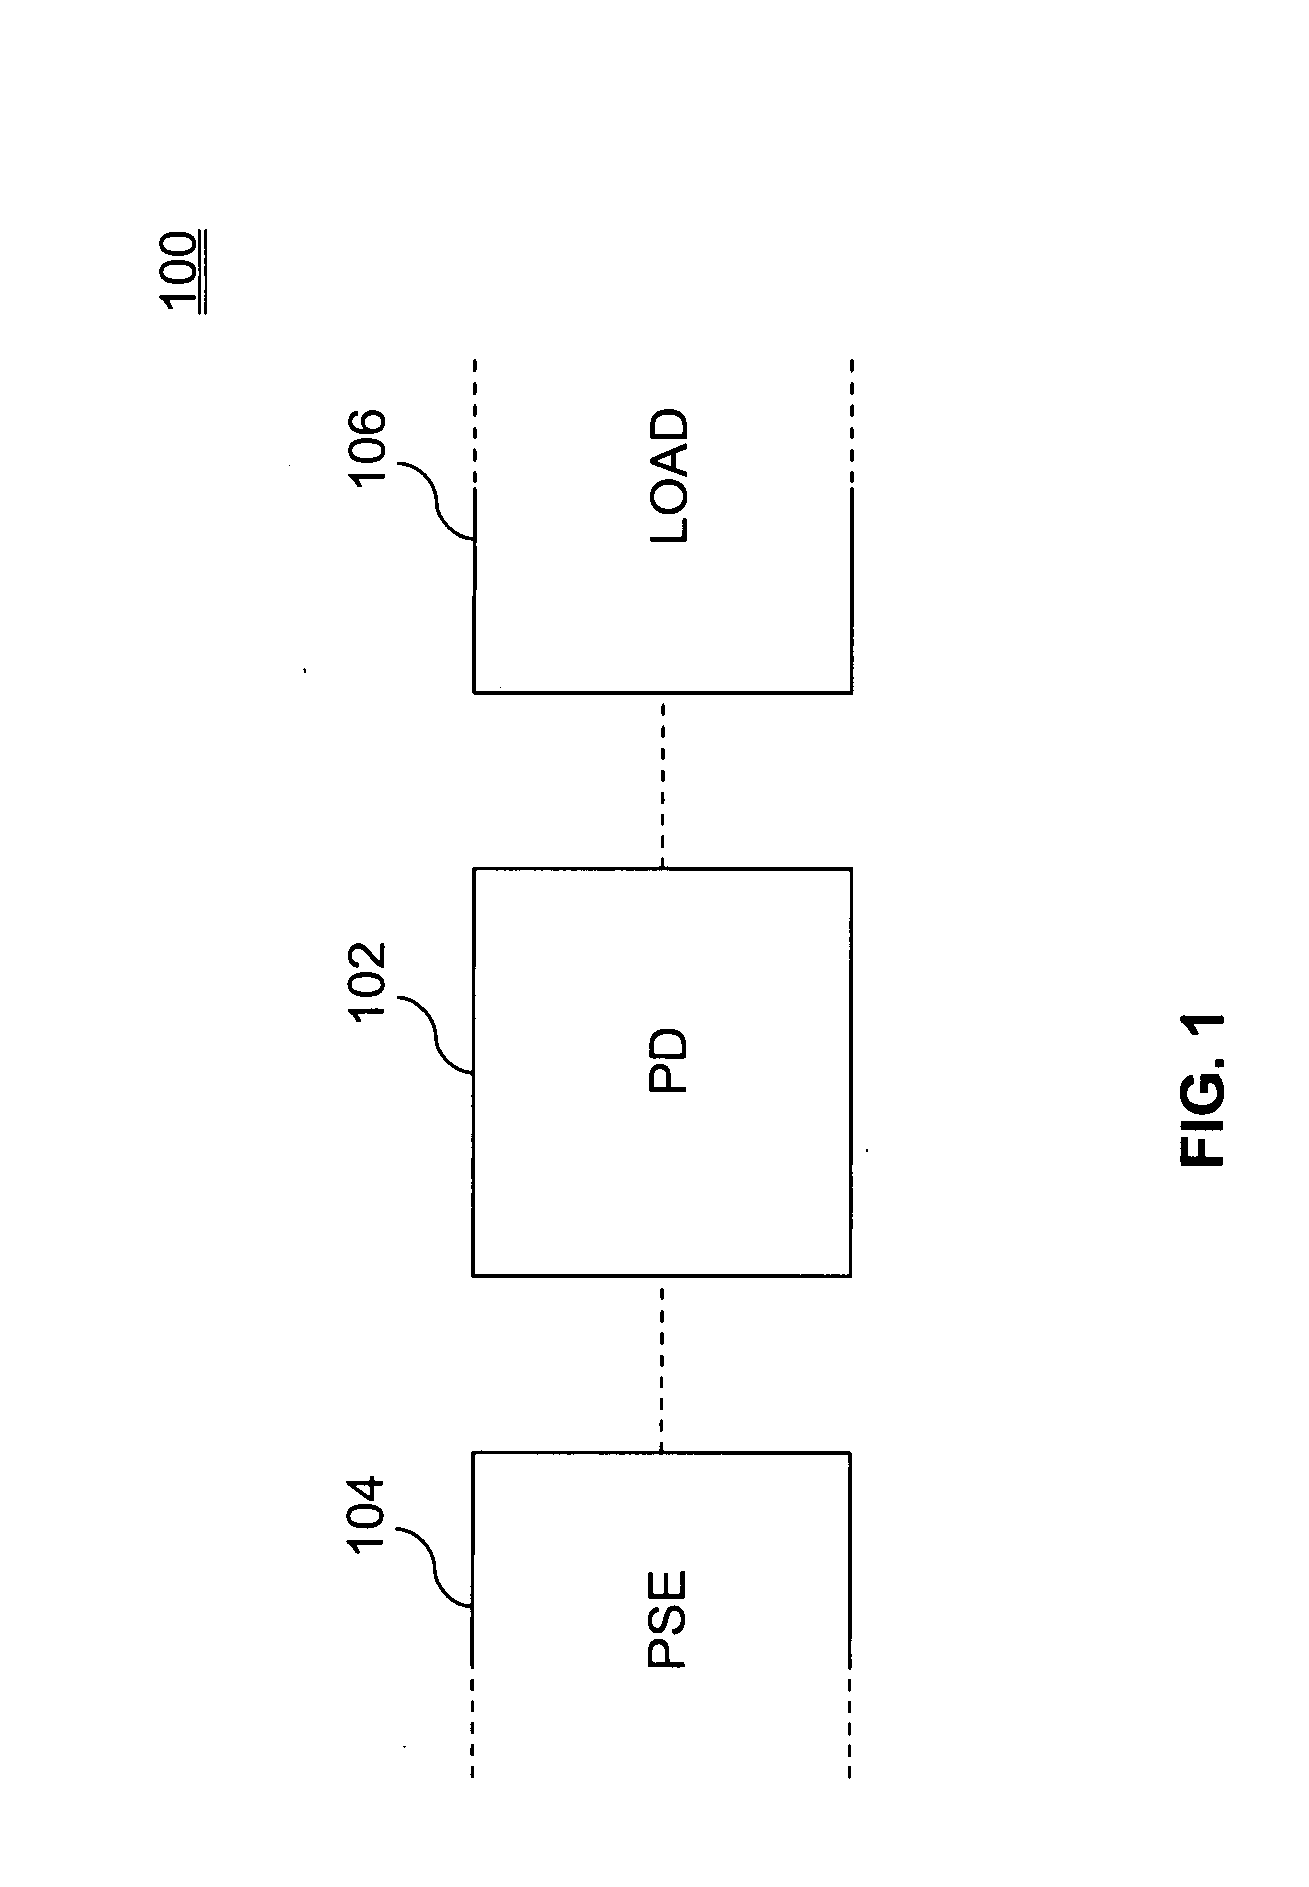 Powered device power classification with increased current limit